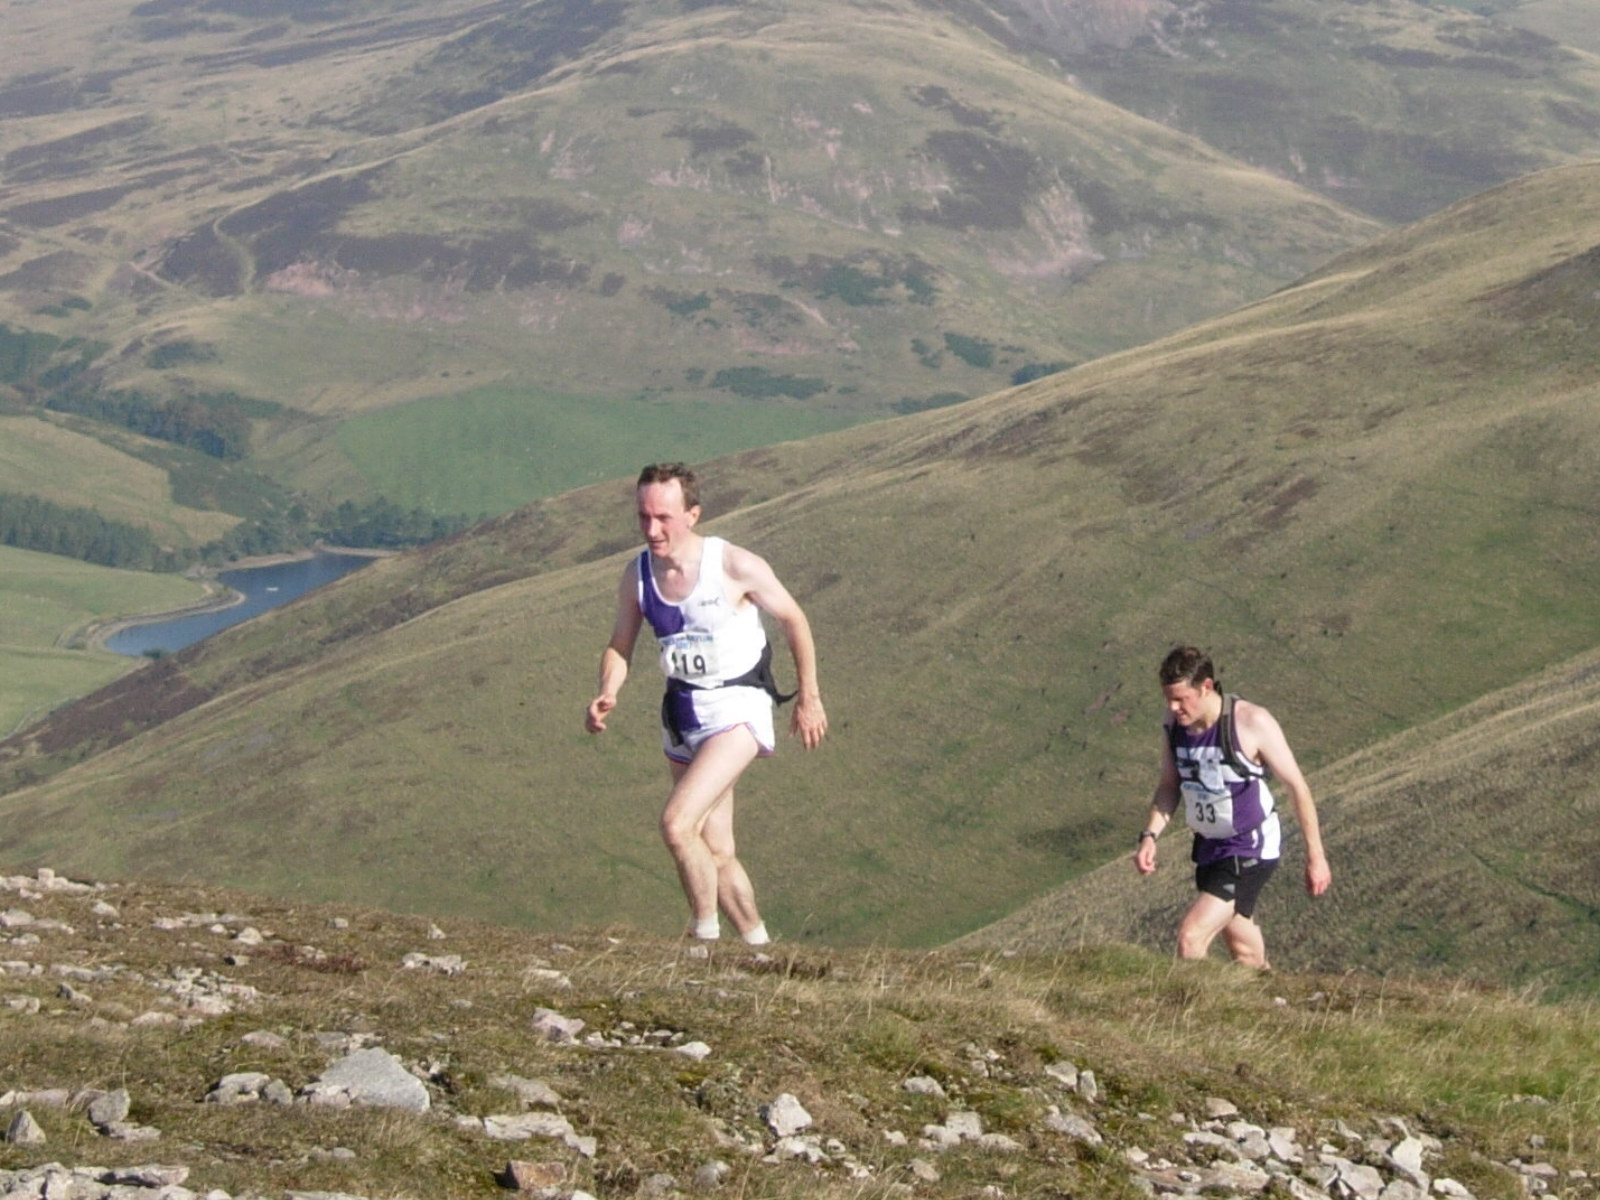 Toiling up
Carnethy in the 2007 Pentland Skyline